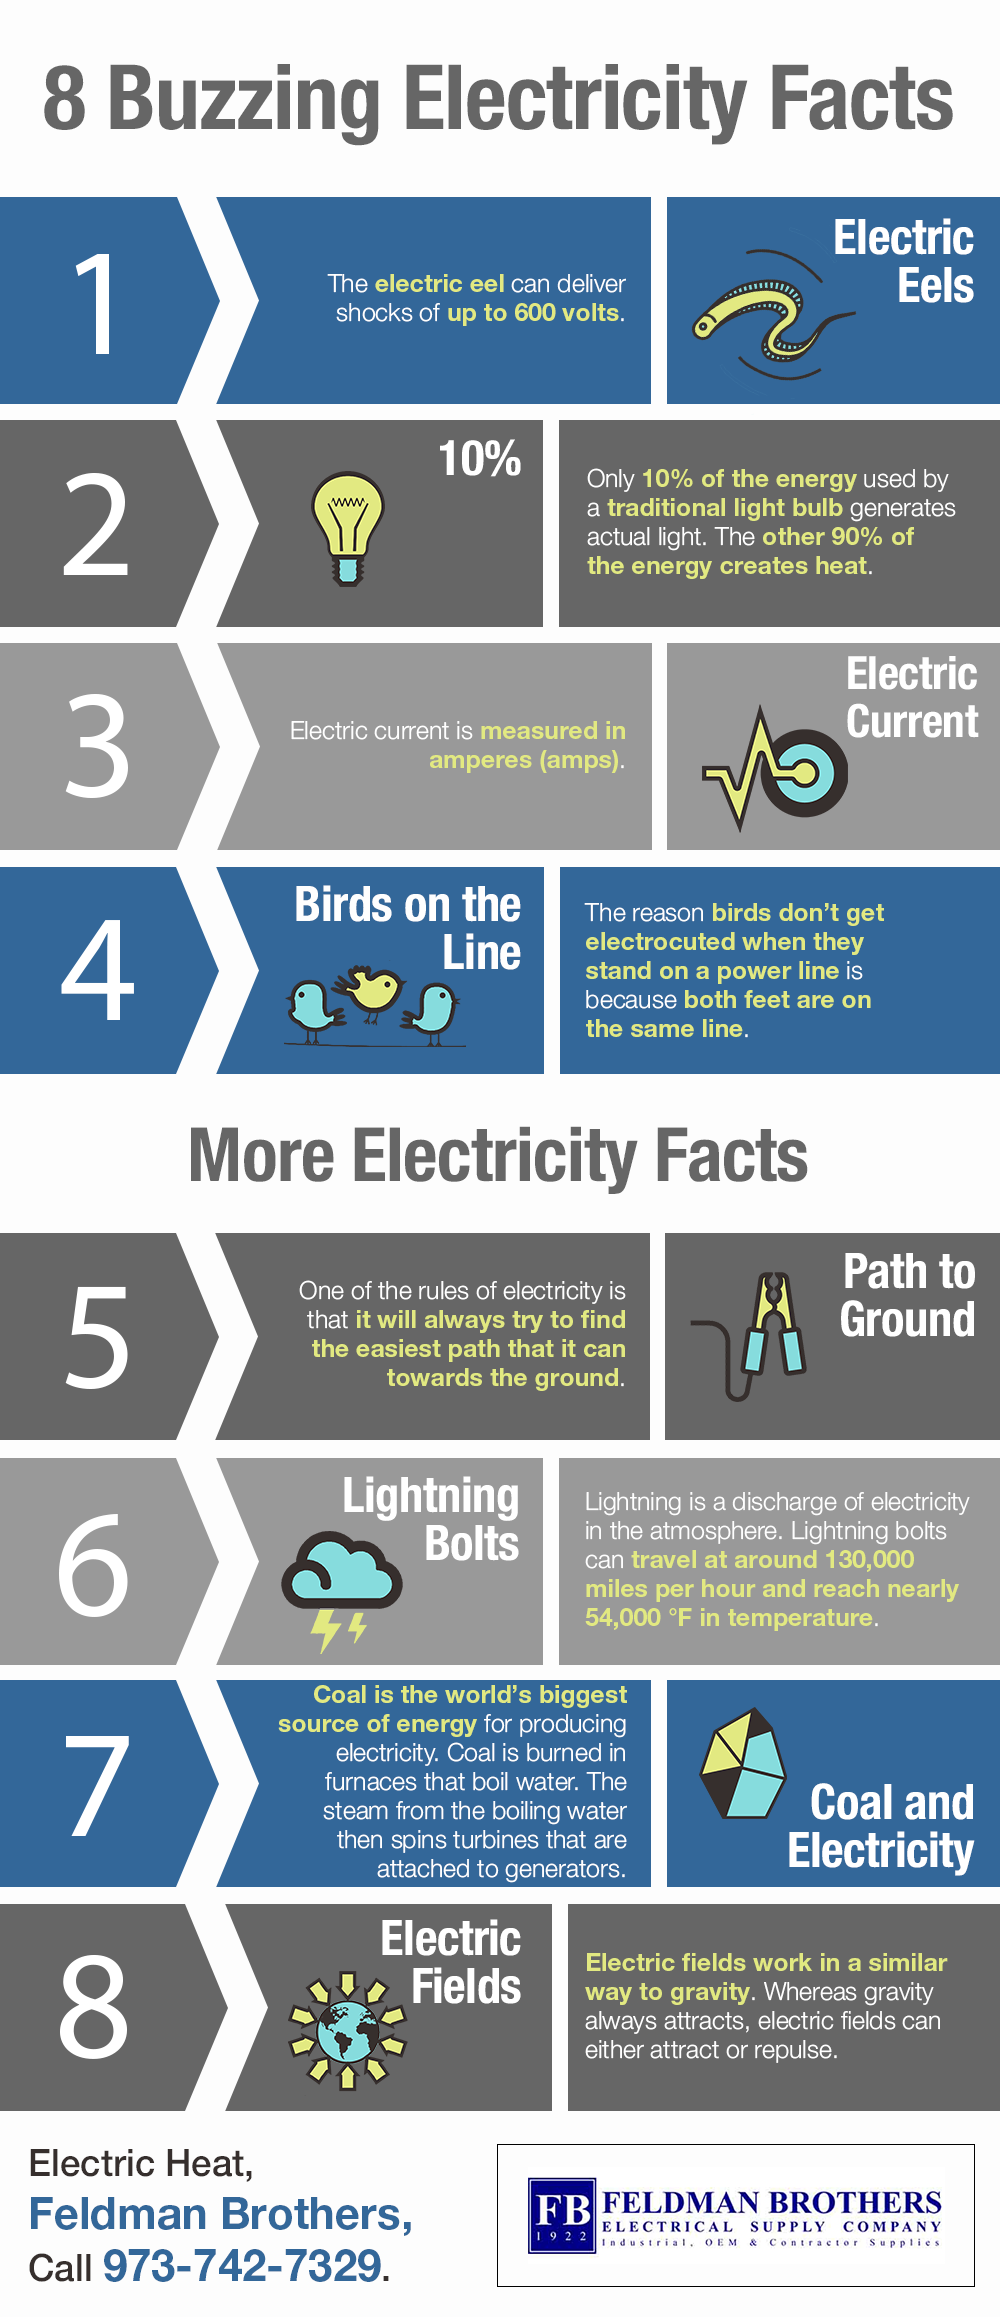 8 Buzzing Electricity Facts | Shared Info Graphics